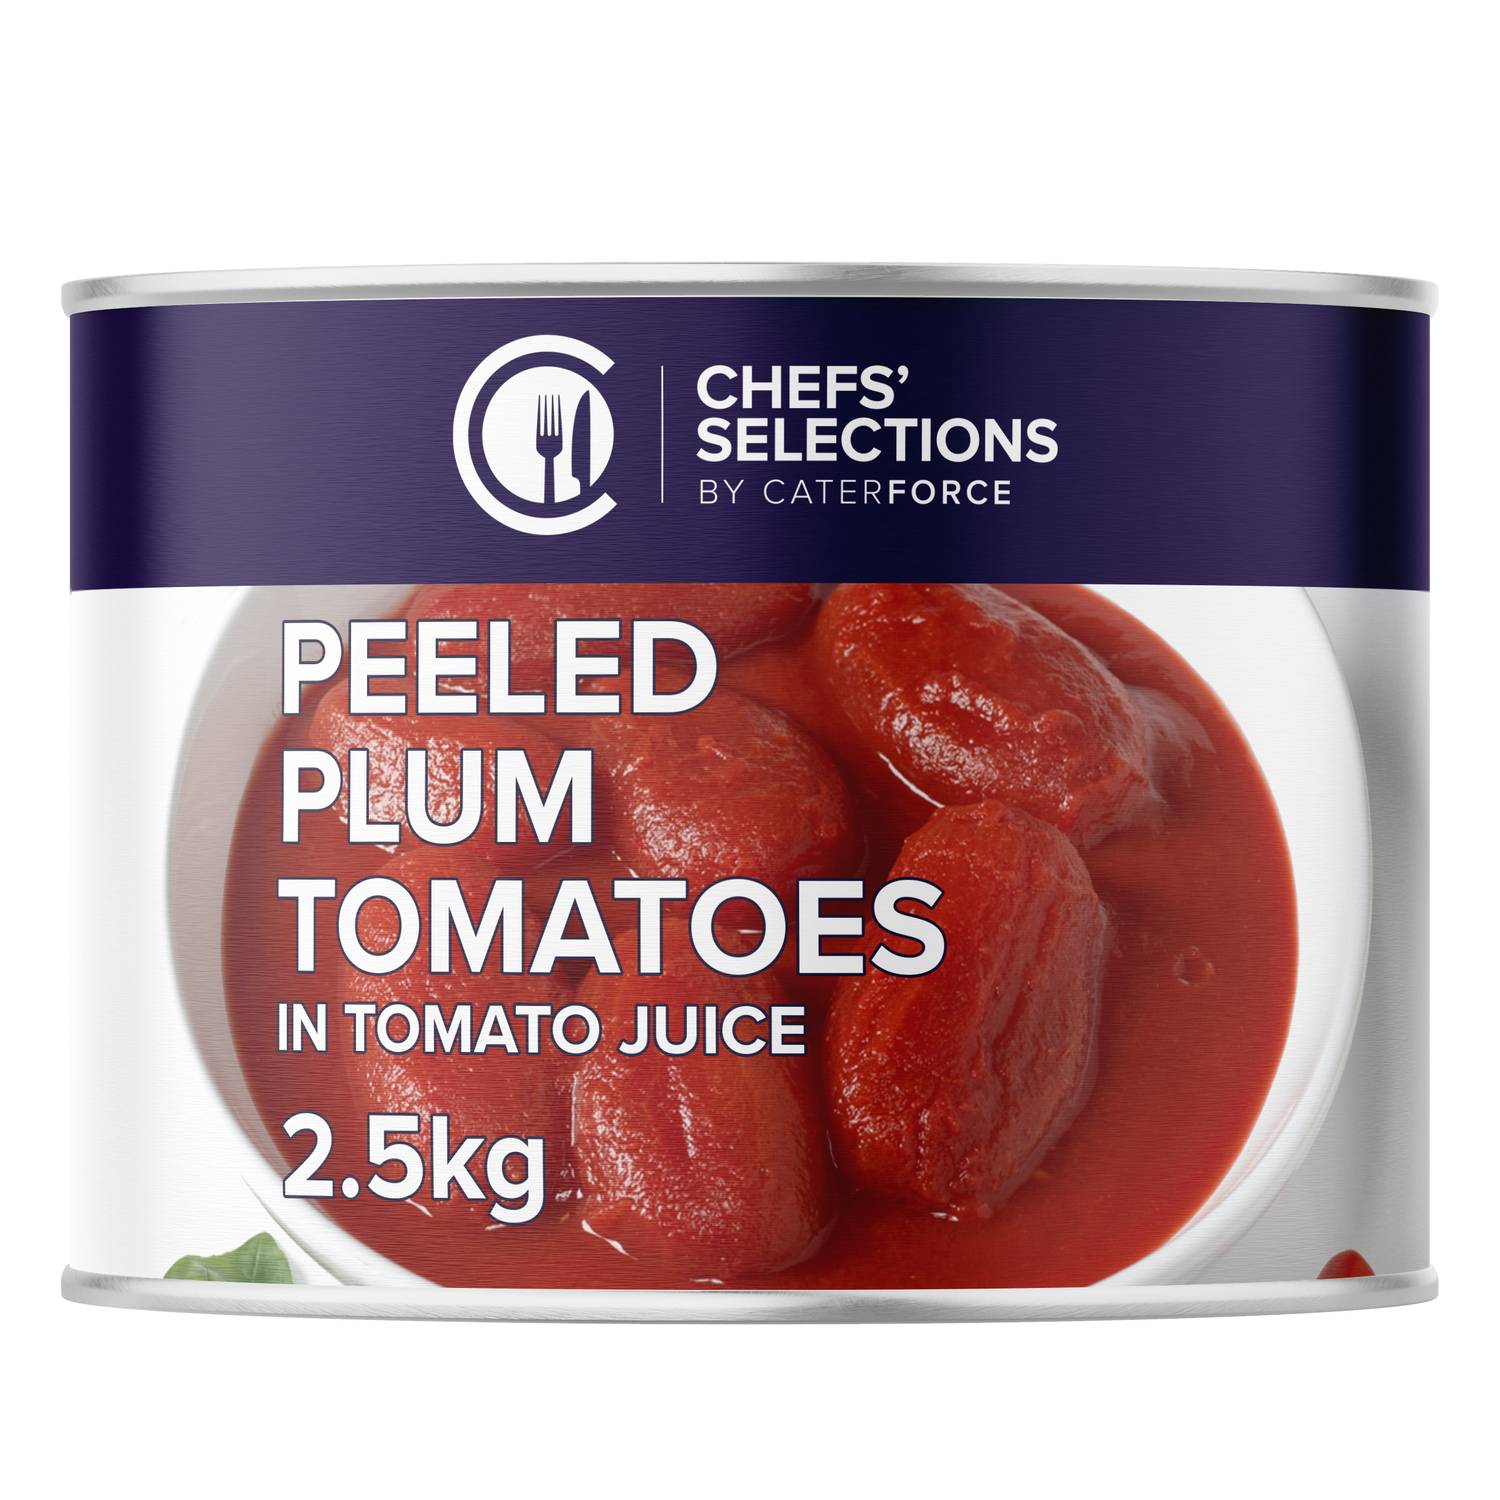 Chefs’ Selections’ Plum Tomatoes (6 x 2.5kg)